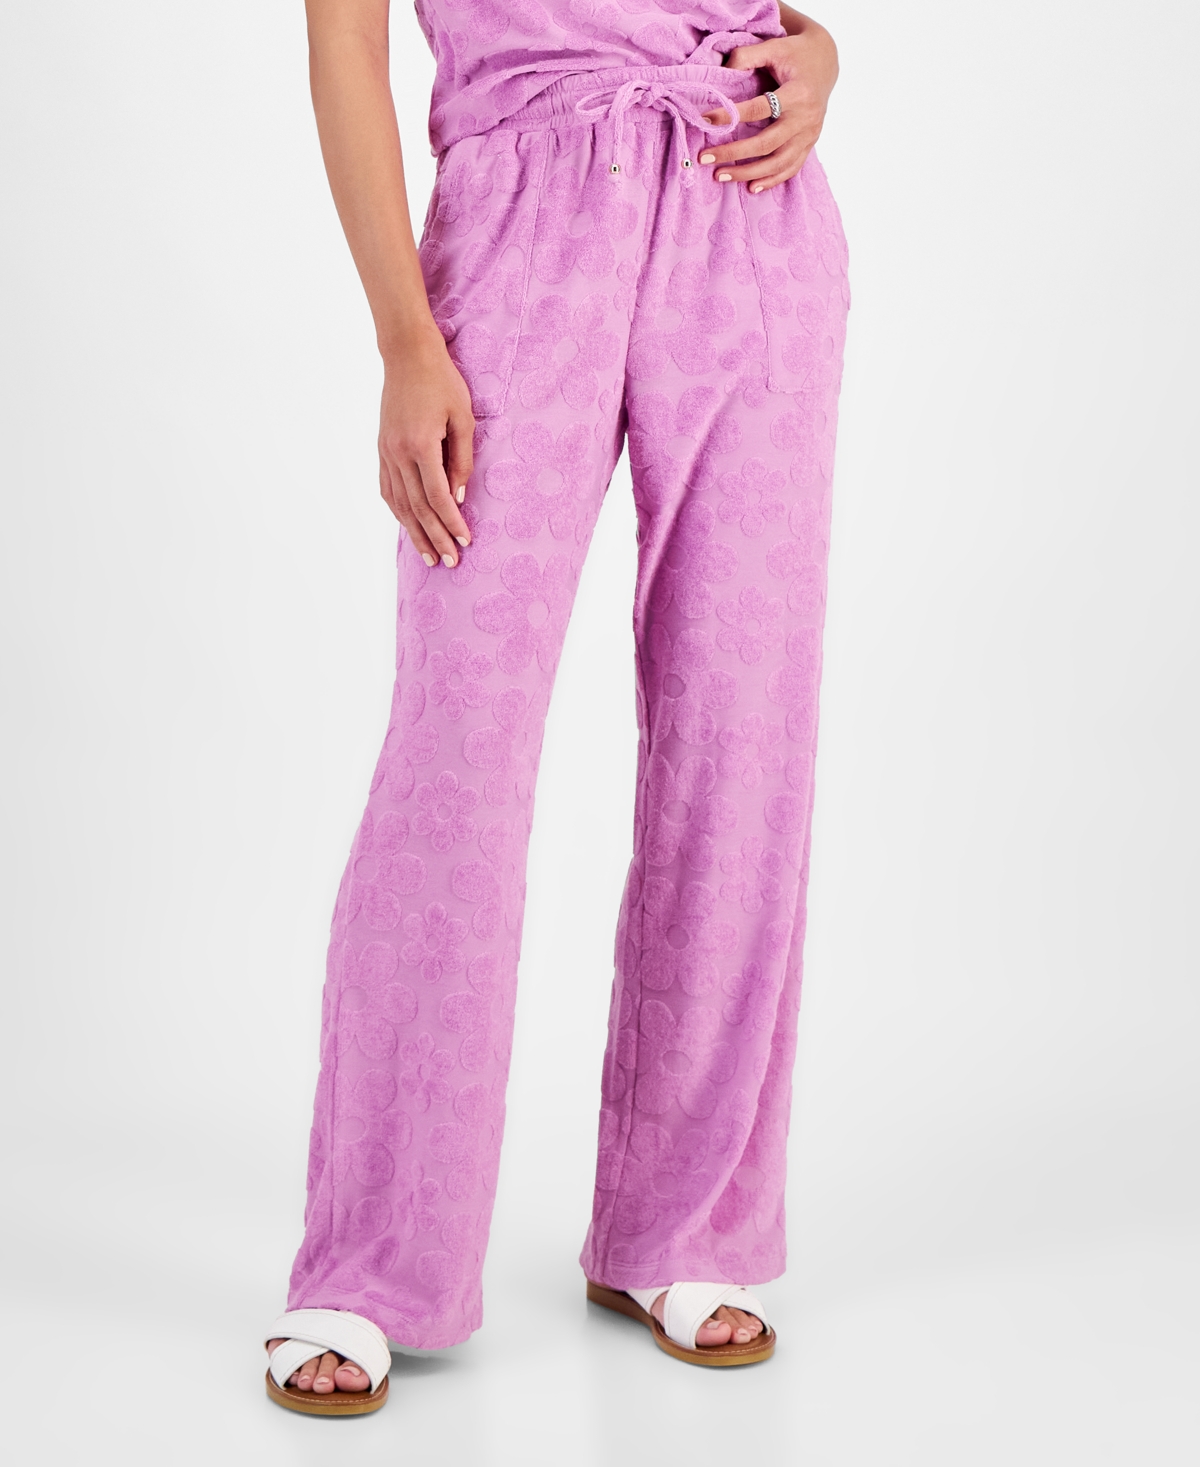 Juniors' Velour Drawstring Cover-Up Pants, Created for Macy's - Violet Sun